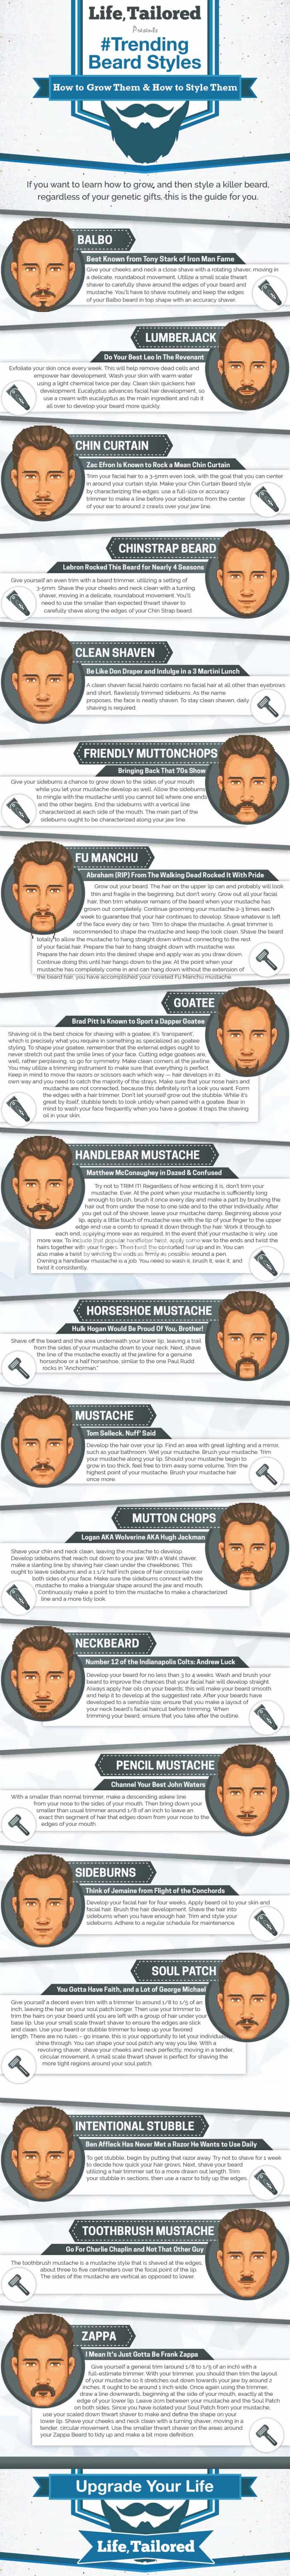 infographic describes How to grow and style your beard infographic